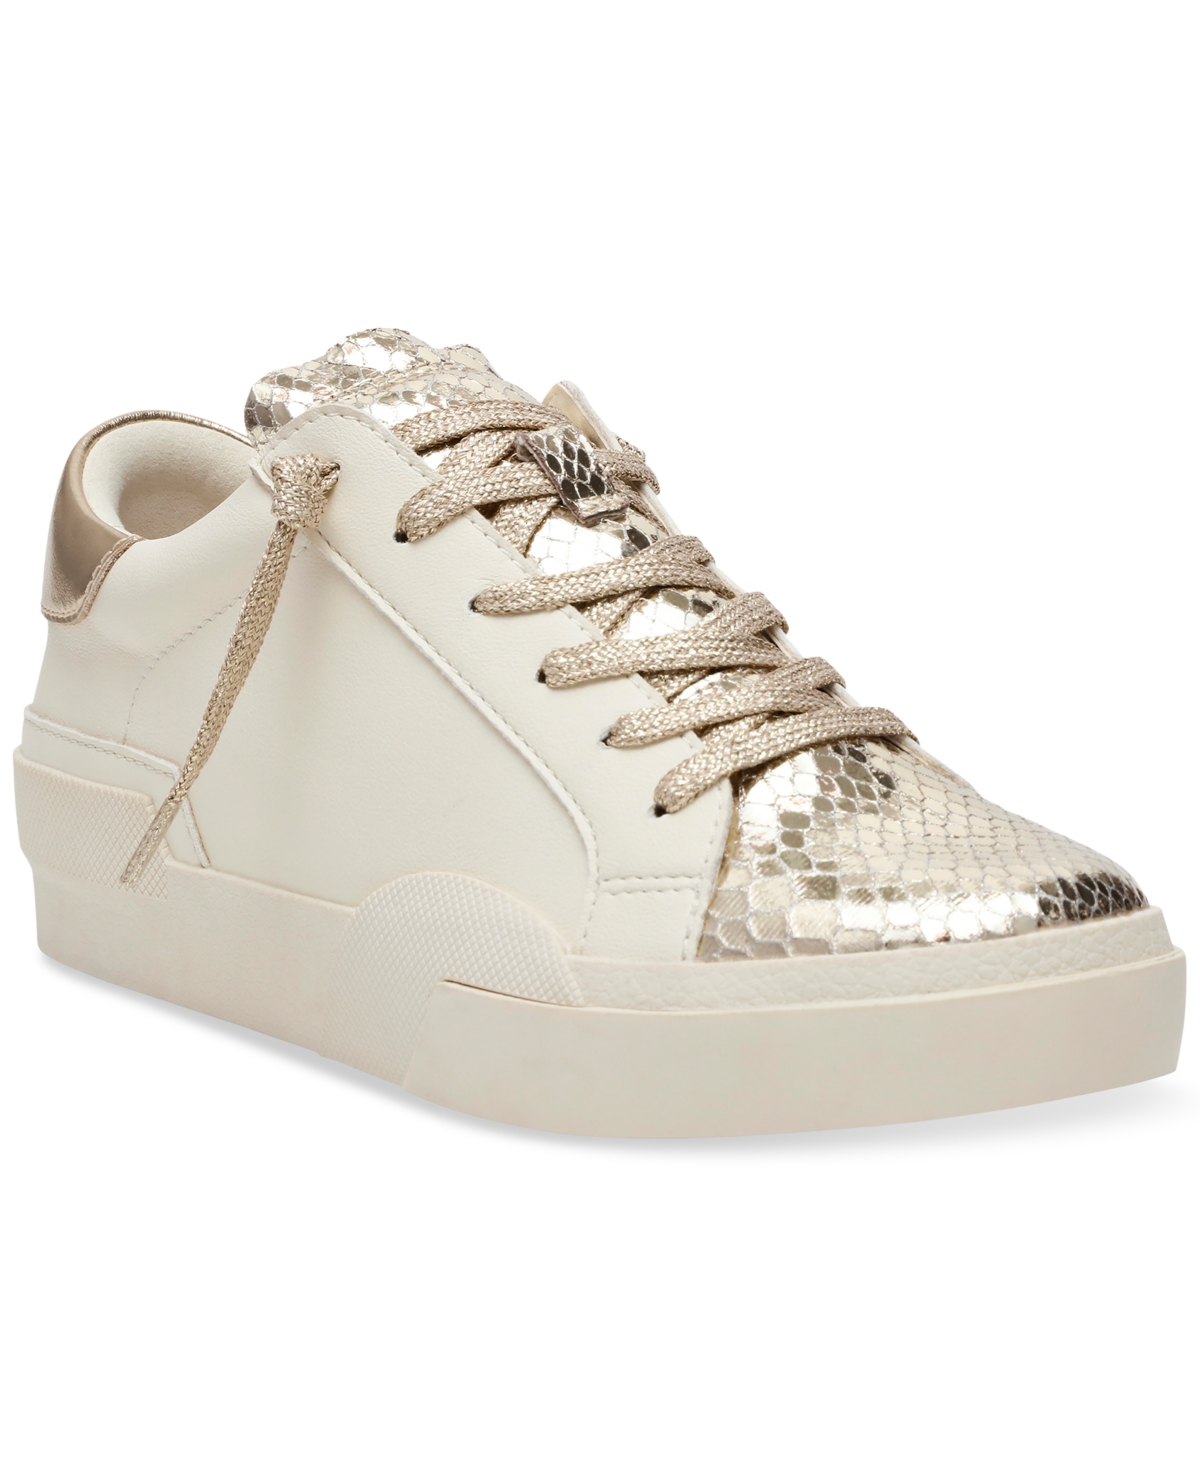 Women's Helix Lace-Up Low-Top Sneakers - Gold Multi